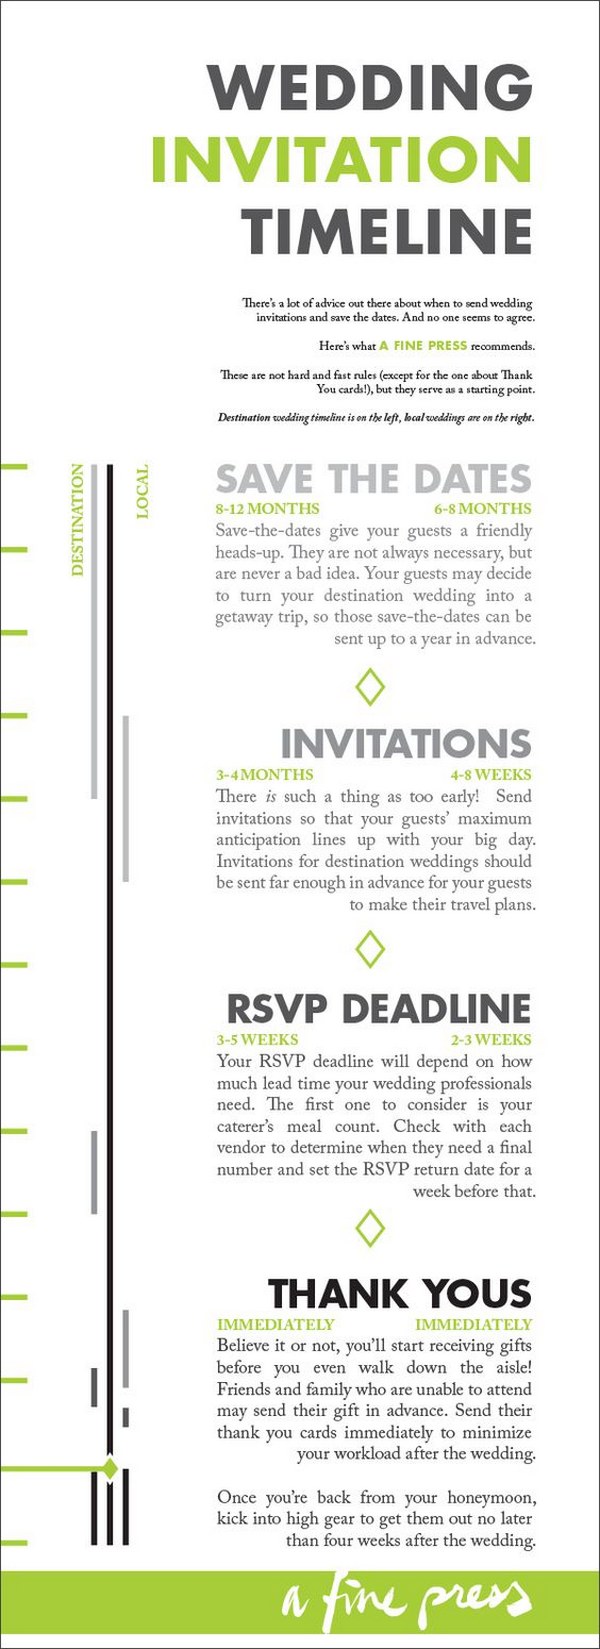 timeline of when to send your wedding invitations and save-the-dates